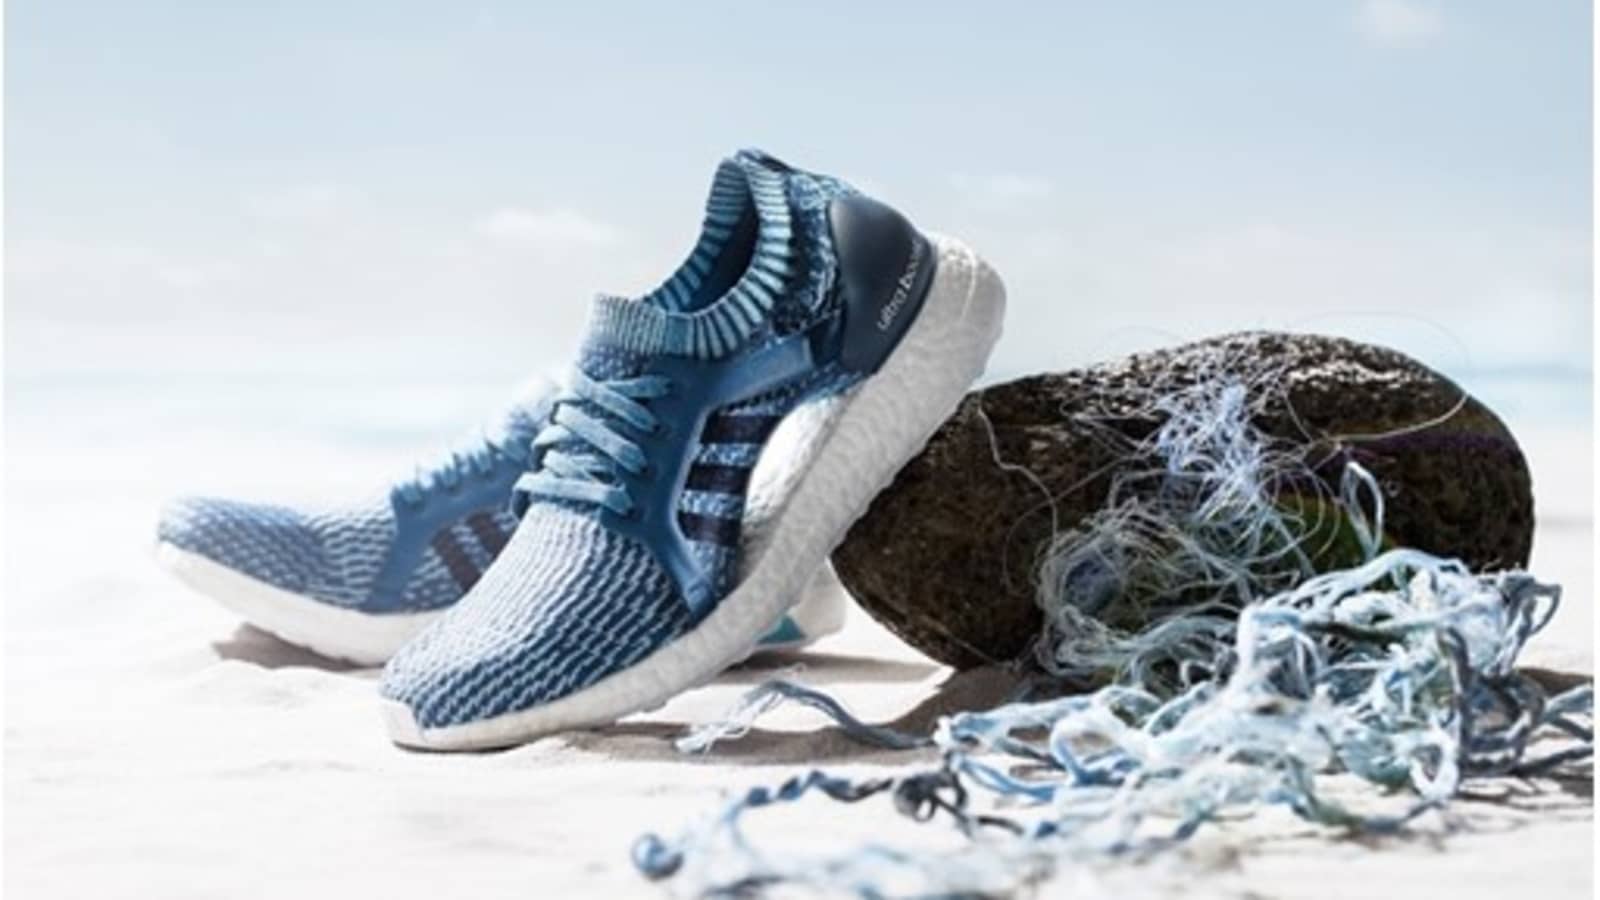 bånd afstand faglært Adidas sold 1 million shoes made out of ocean plastic in 2017